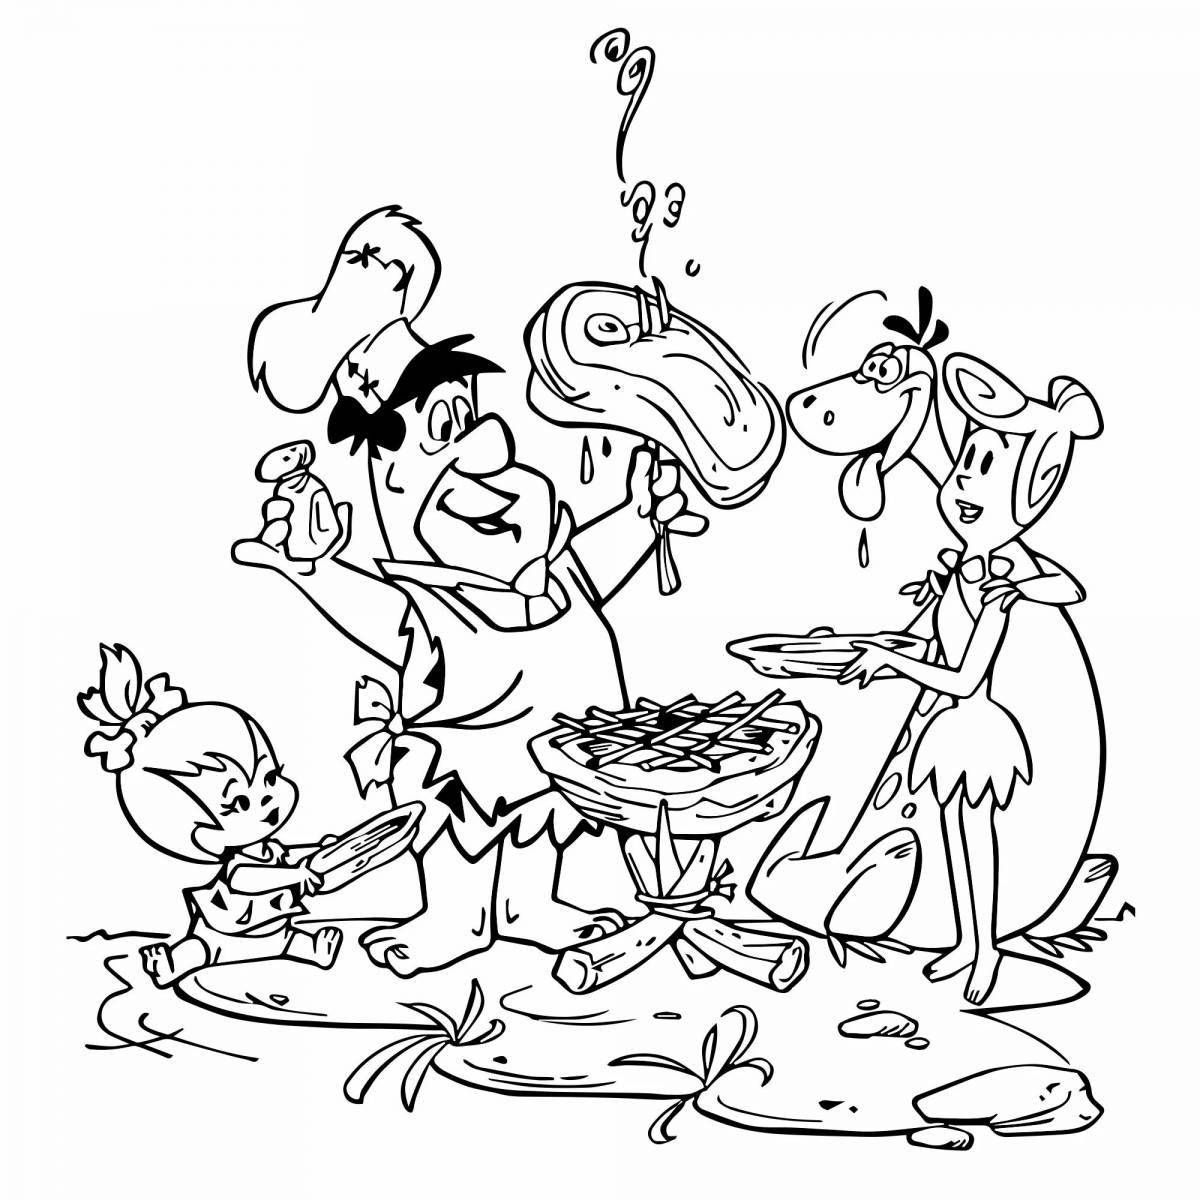 Fred flintstone colorful coloring page